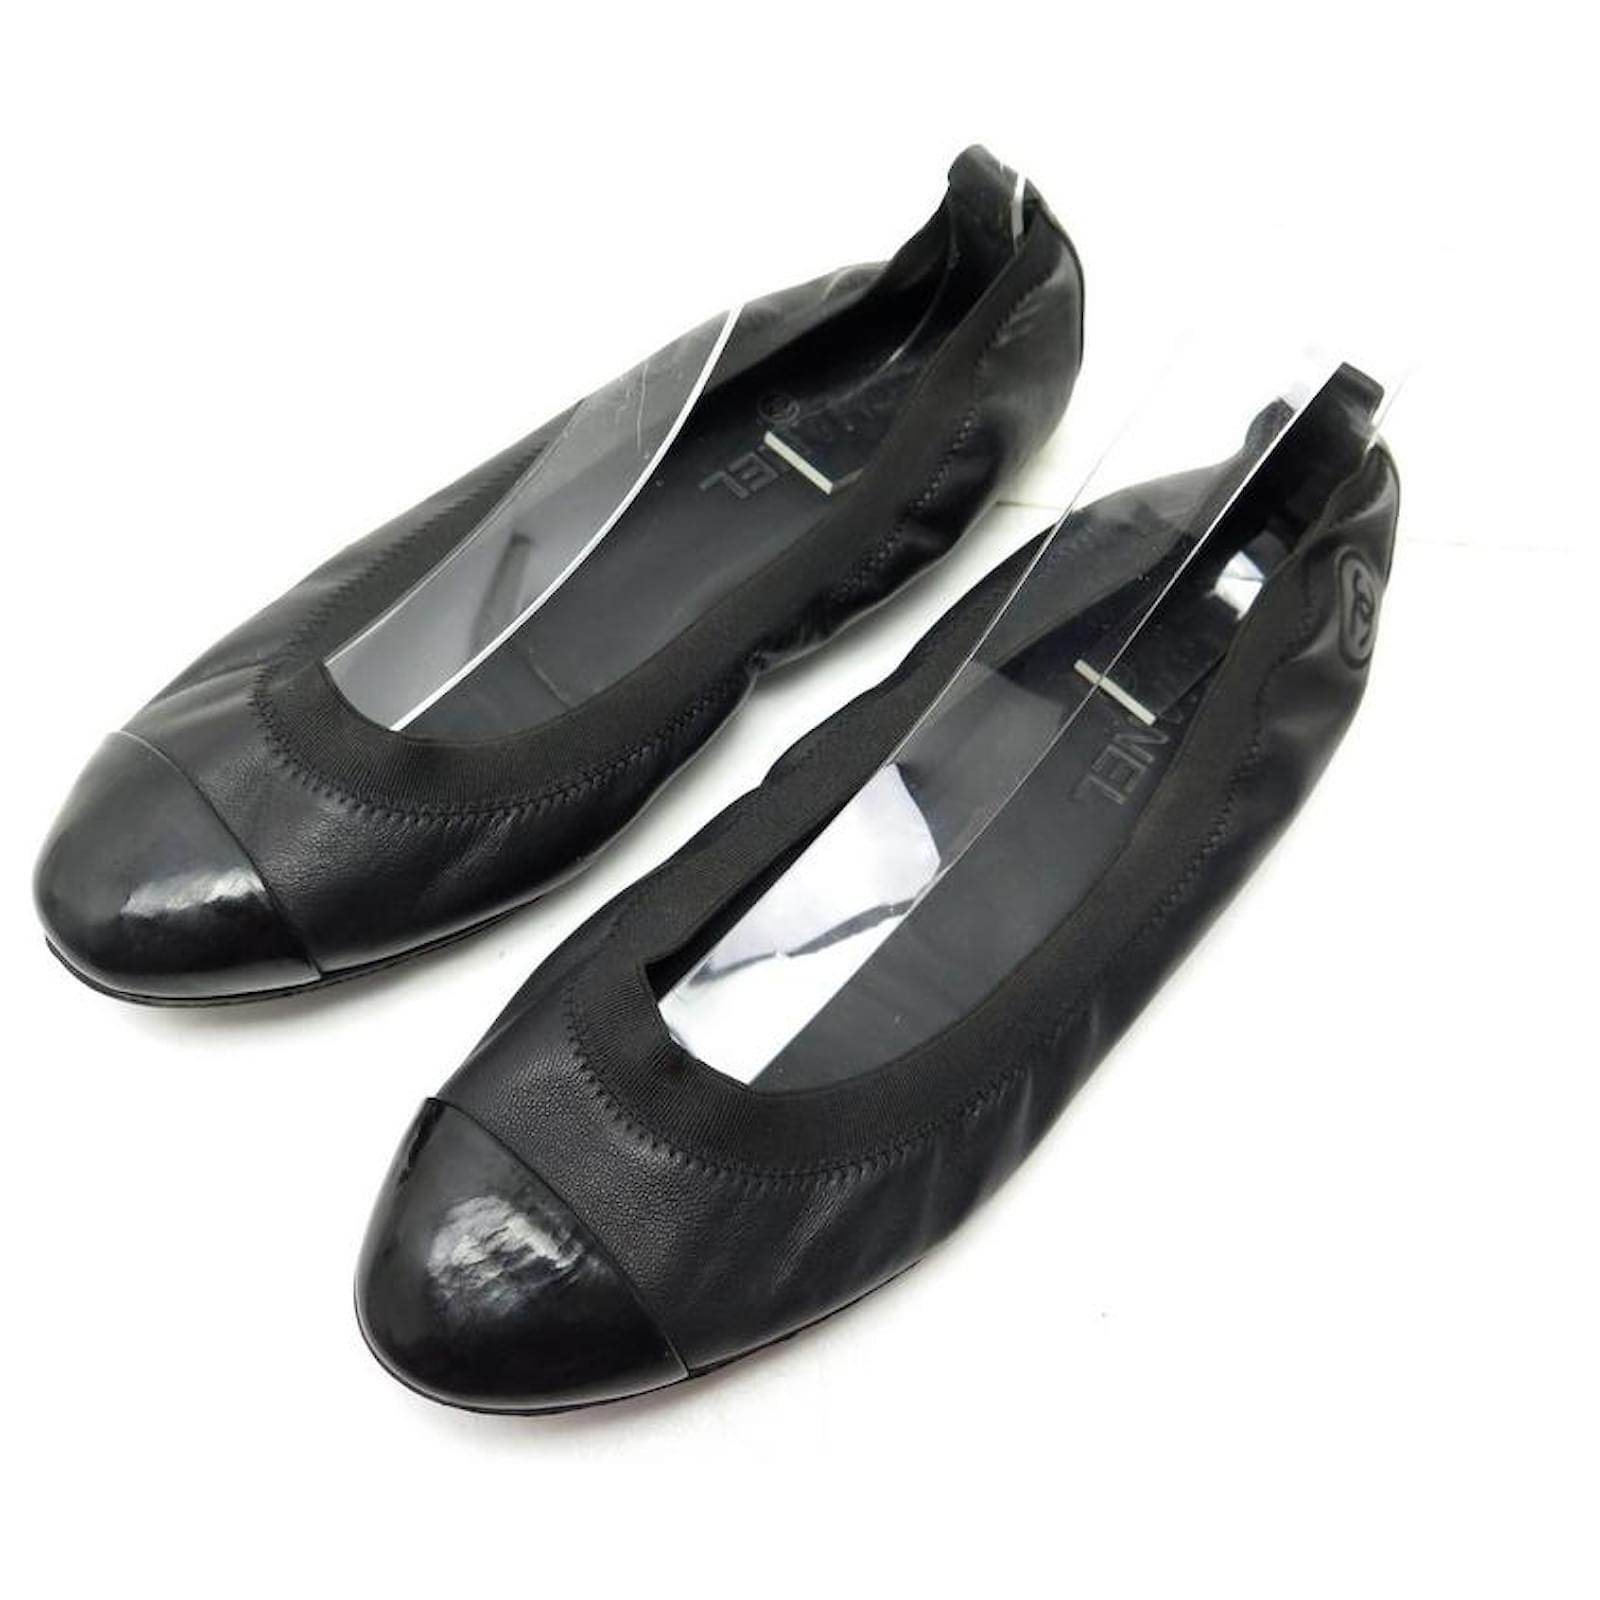 CHANEL G SHOES26642 Ballet flats 41 BLACK LEATHER PATENT TIPS FLAT